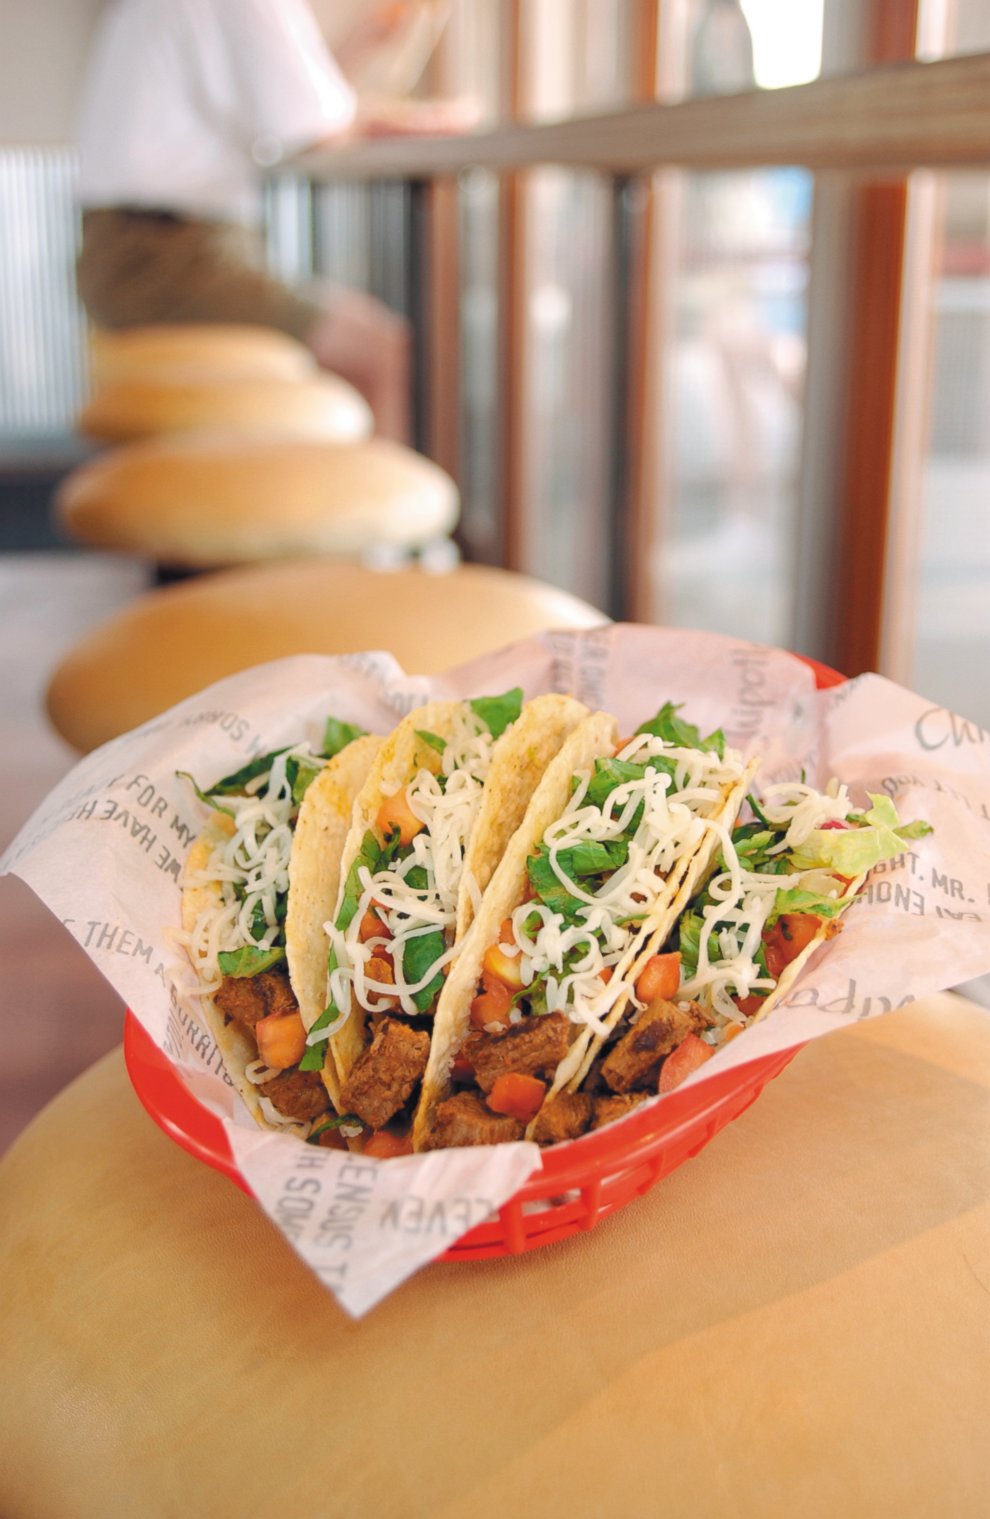 PHOTO: Crispy steak tacos from Chipotle.